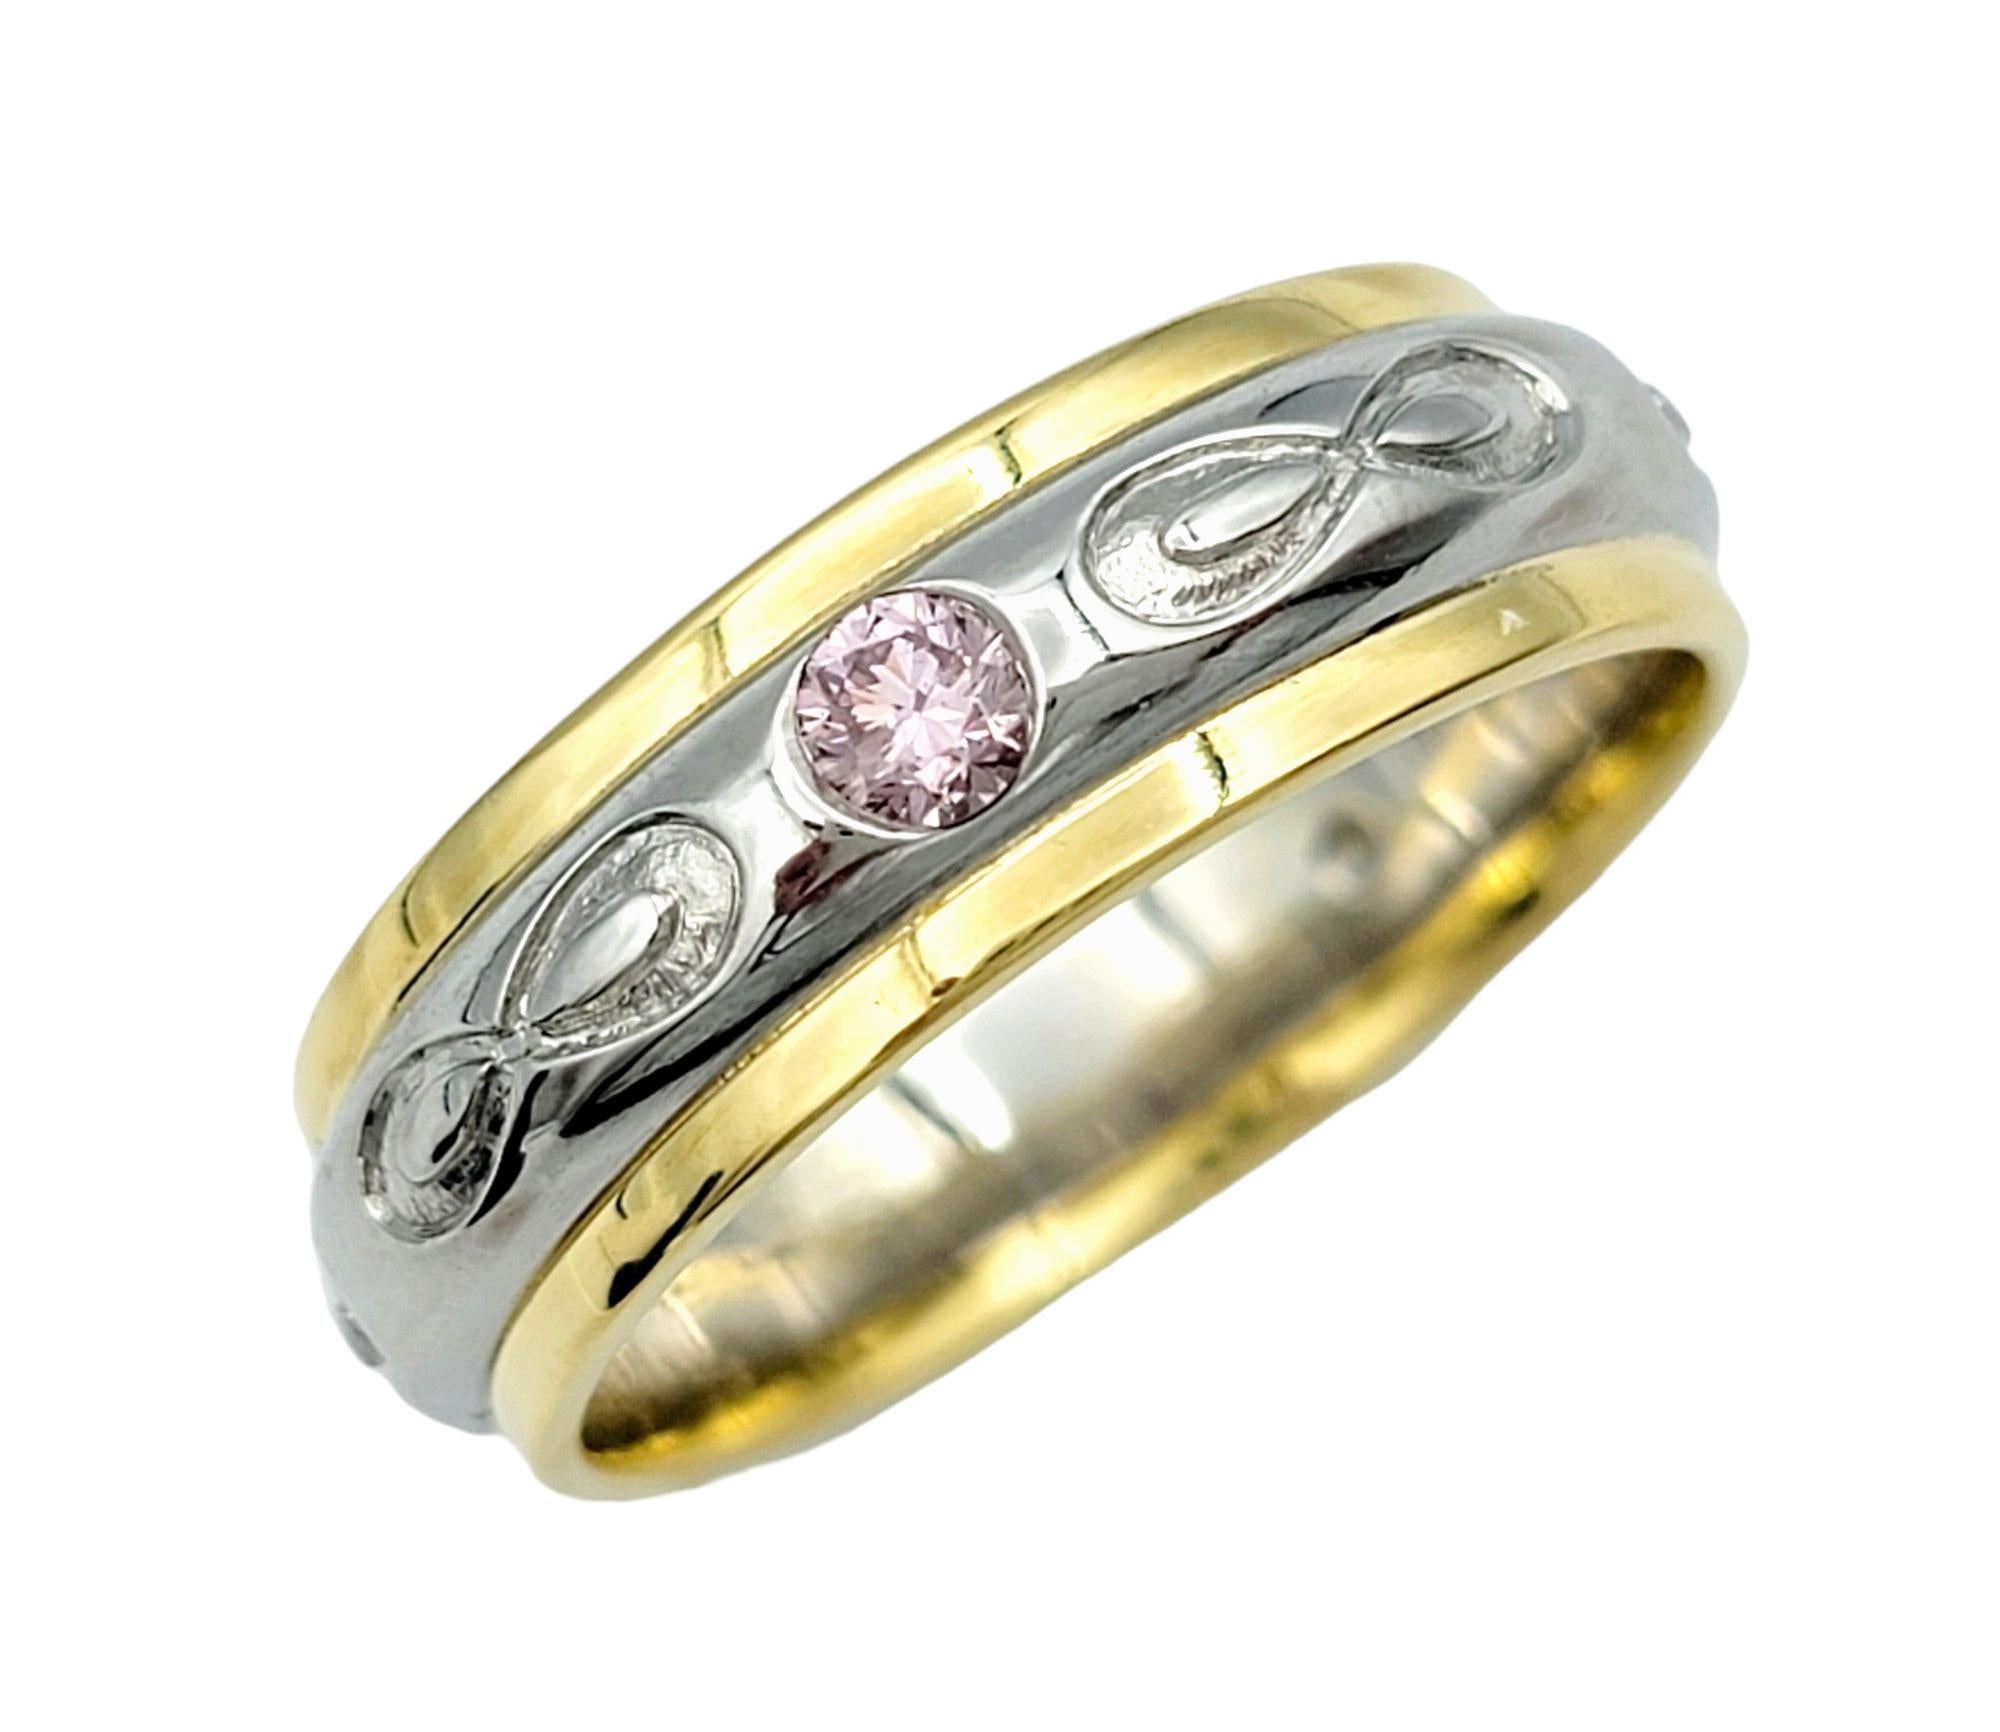 Contemporary Round Brilliant Pink Diamond Band Ring Set in 18 Karat Yellow Gold and Platinum For Sale